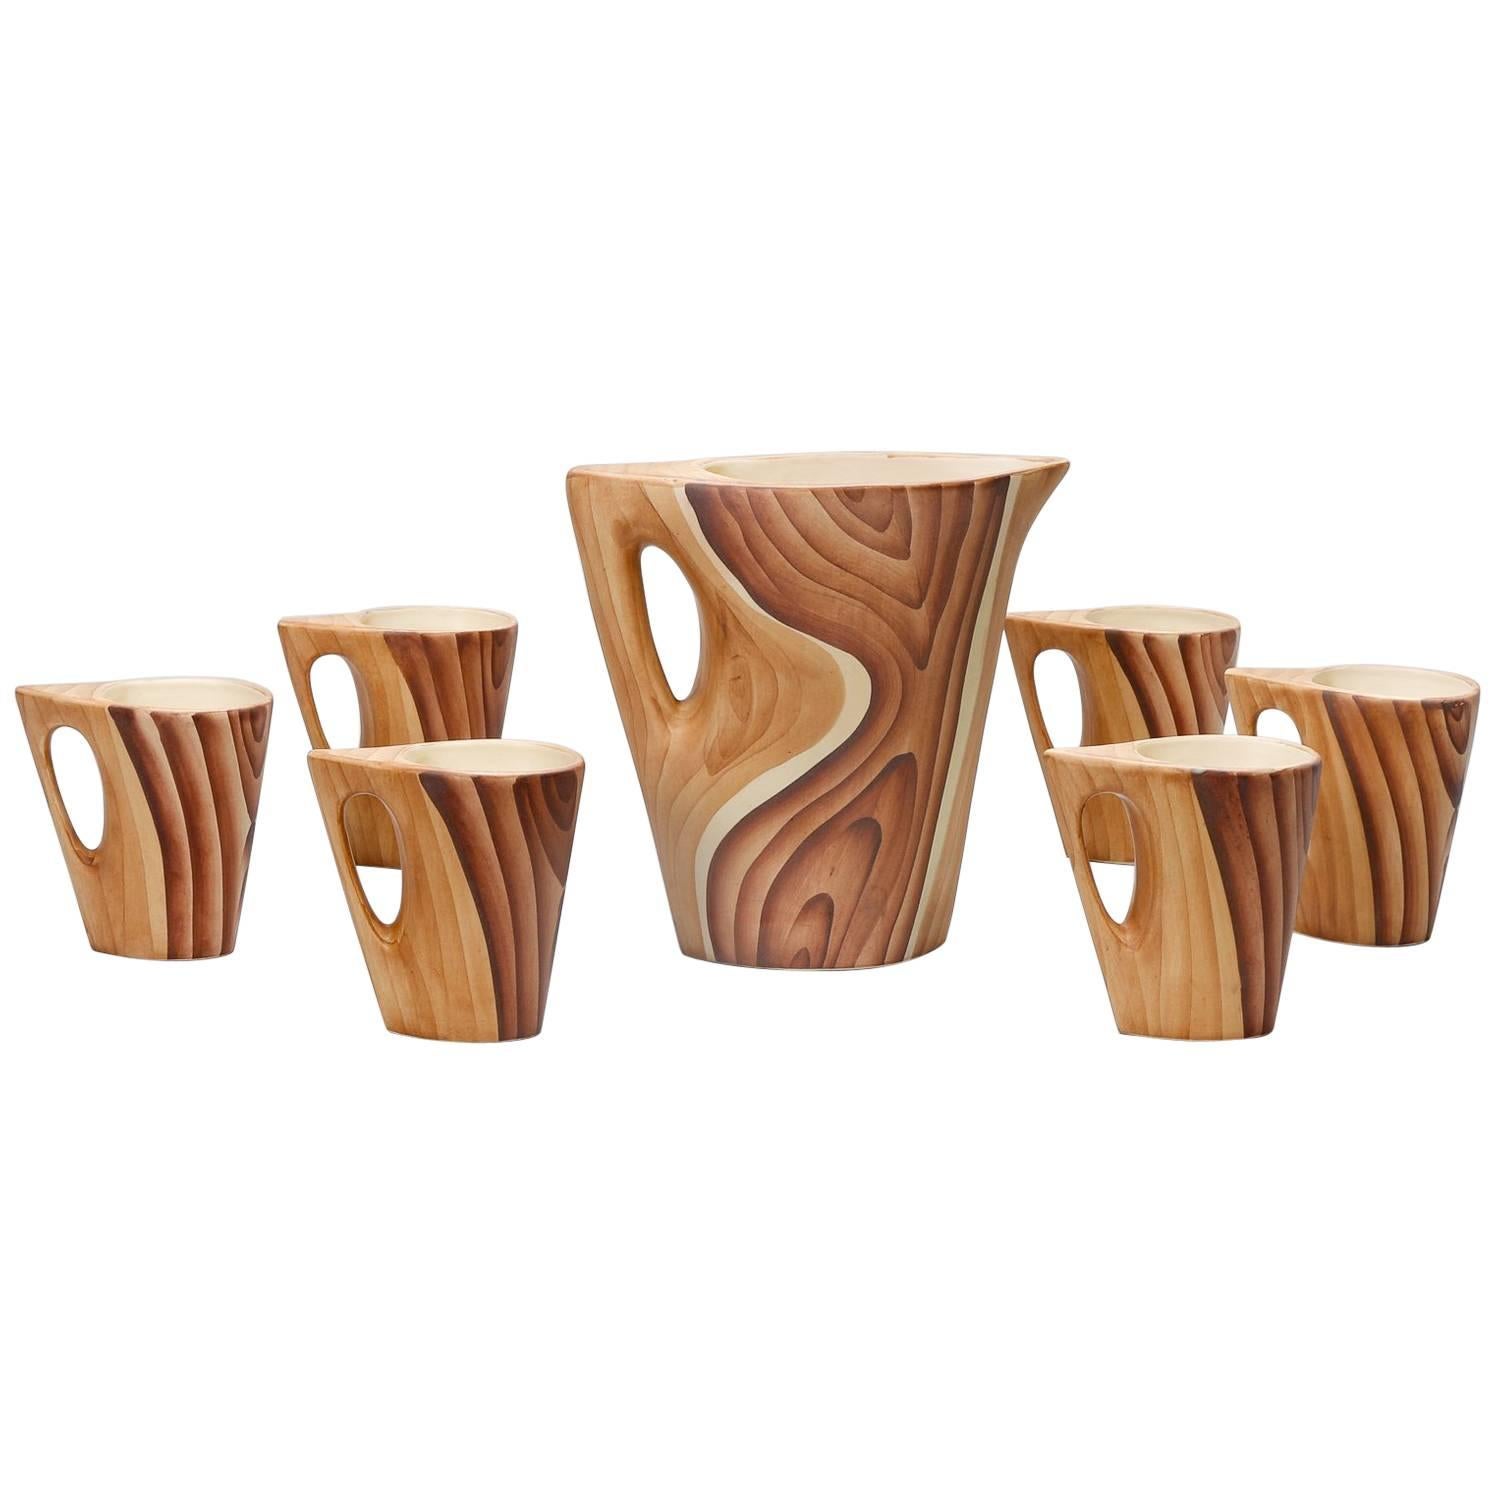 Vallauris Faux Bois Ceramic Pitcher with Six Mugs